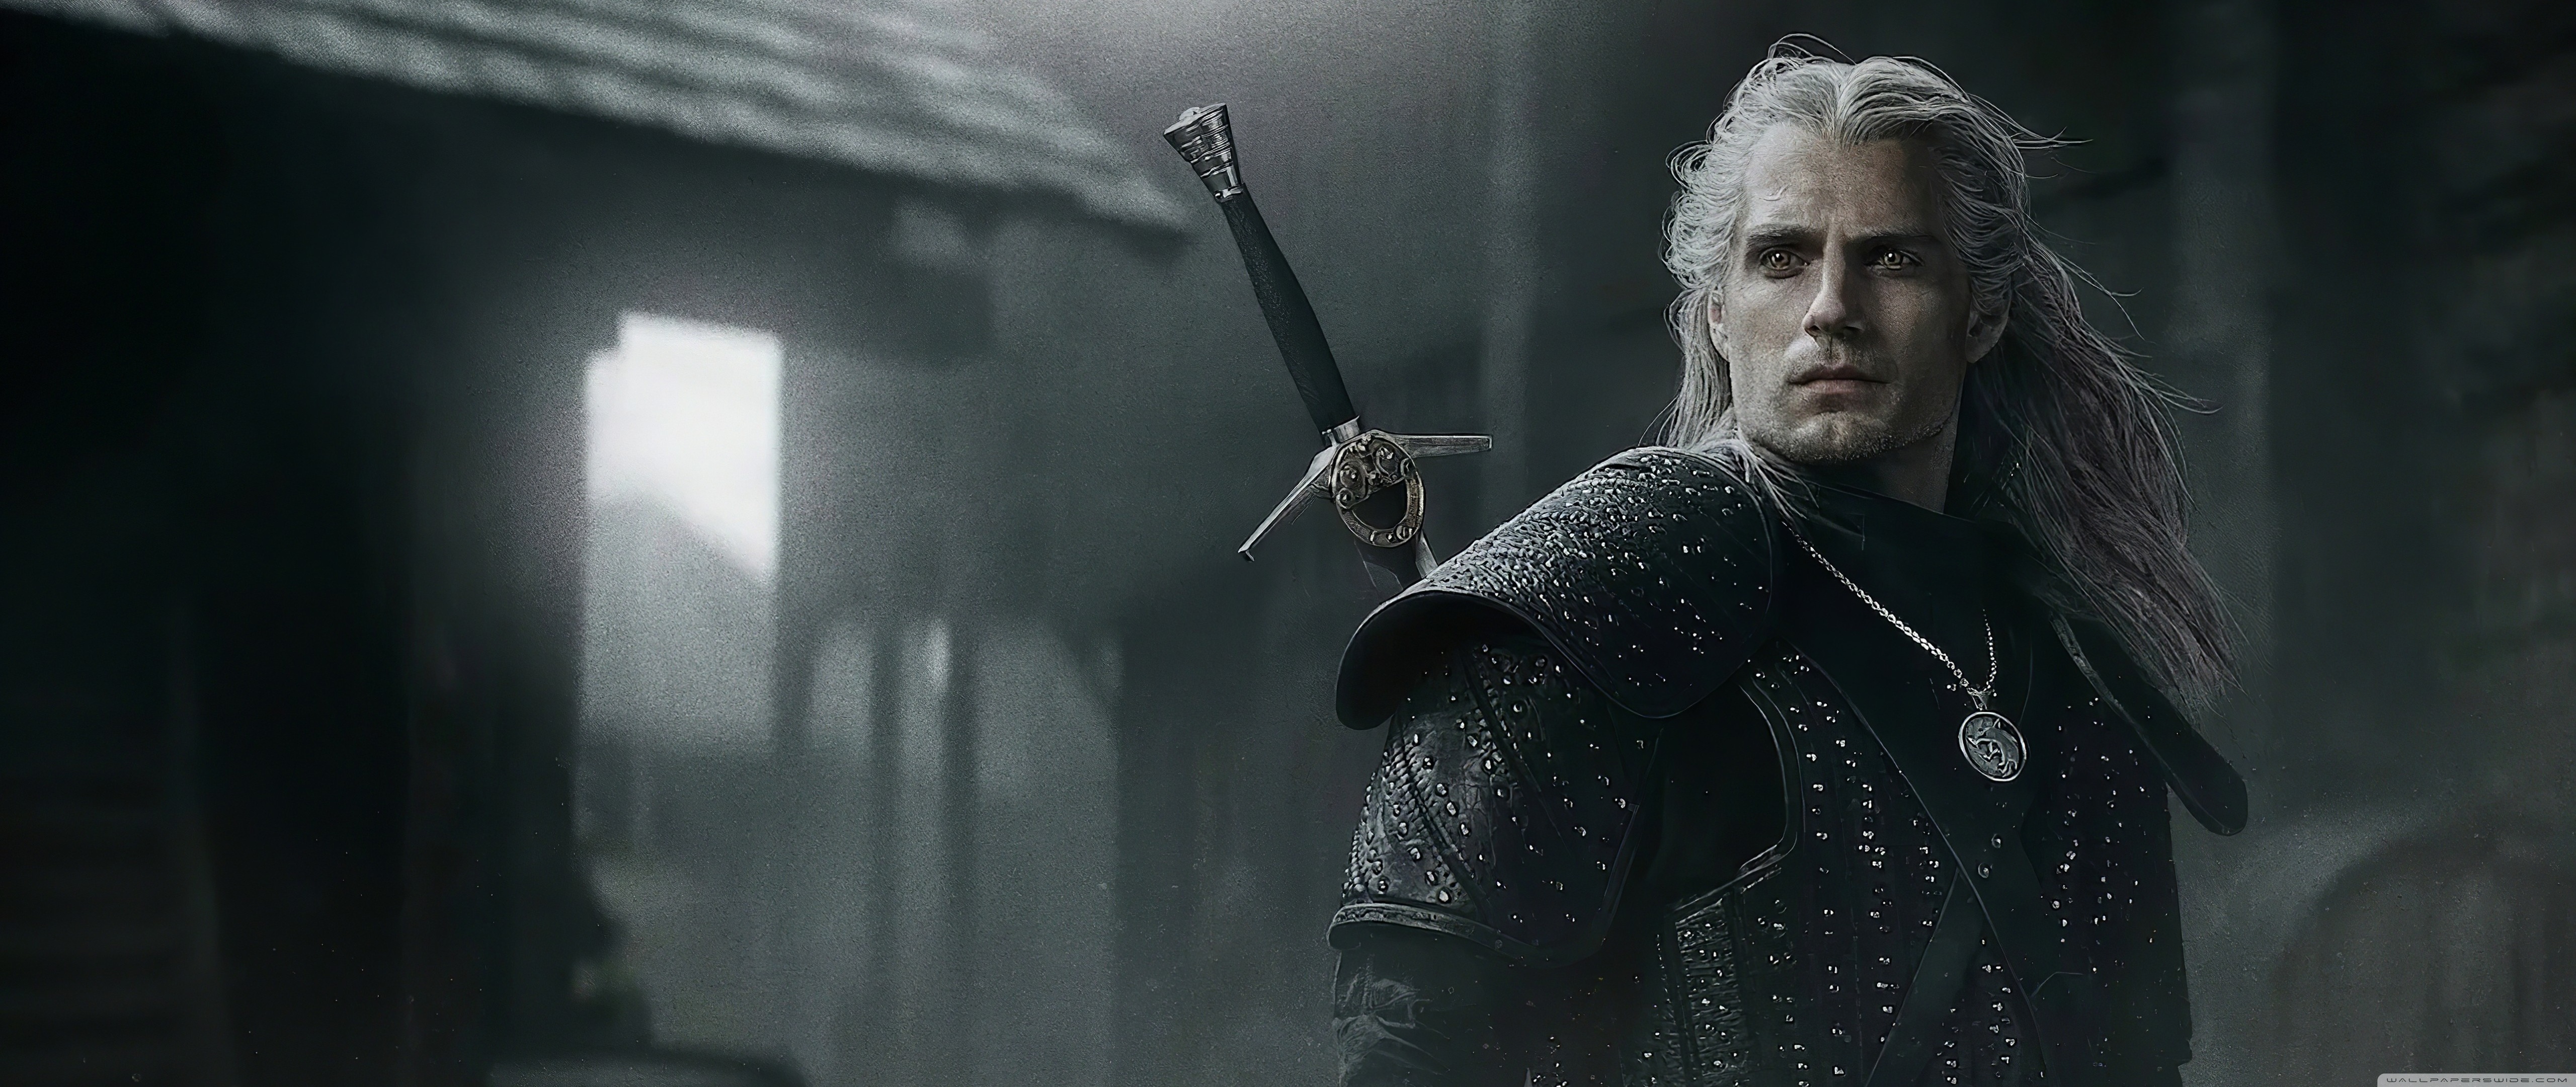 The Witcher Henry Cavill The Witcher TV Series Geralt Of Rivia 5120x2160